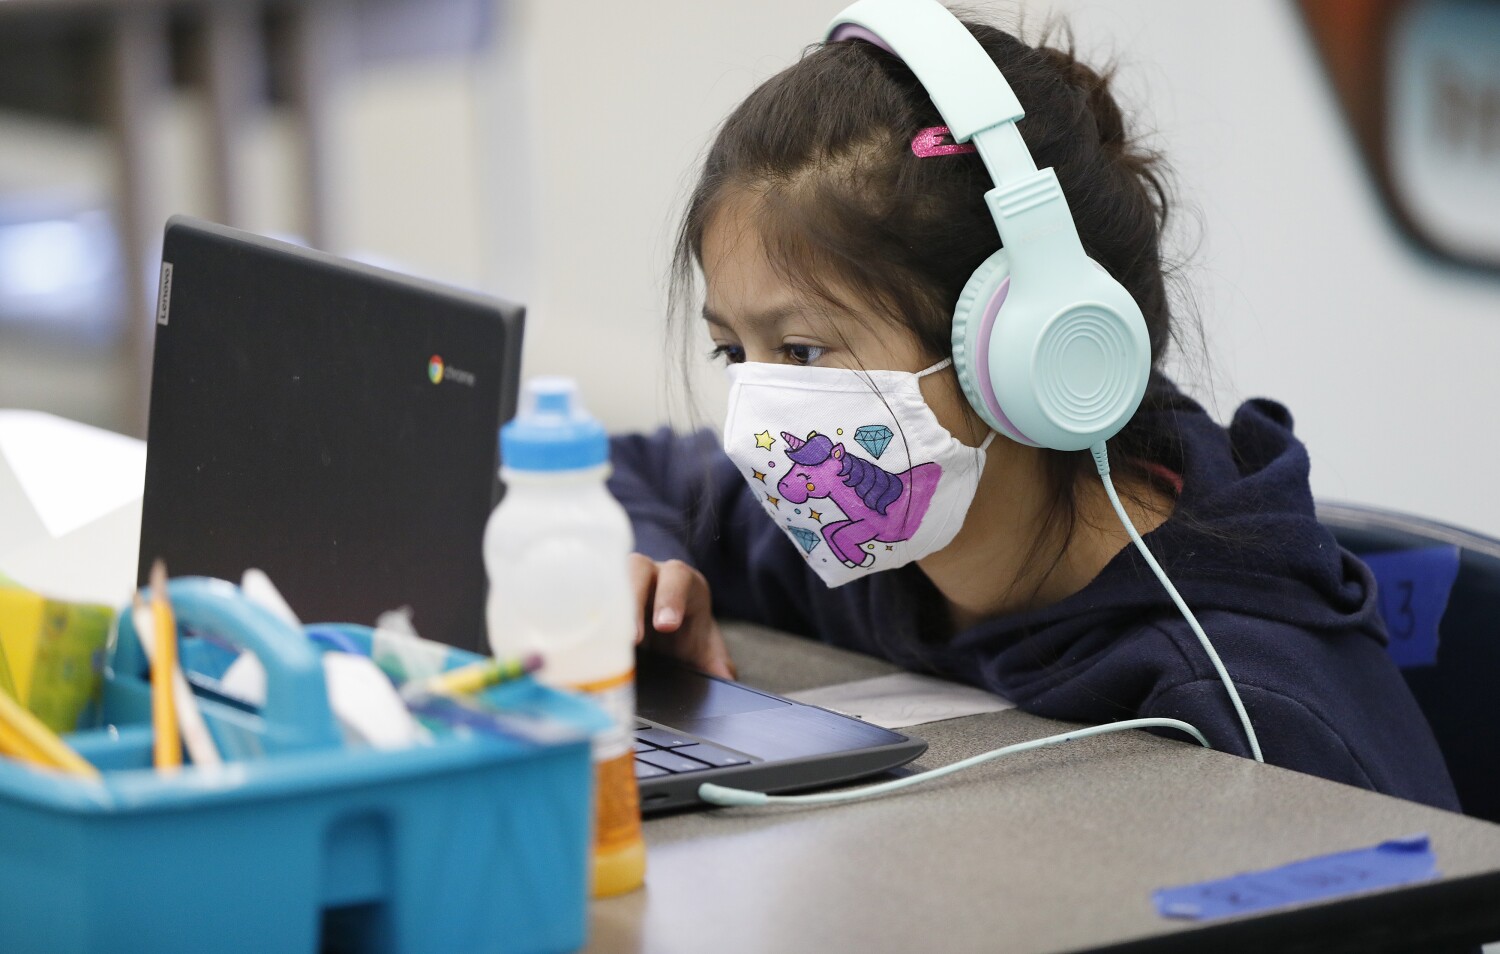 LAUSD is prepping for thousands of unvaccinated students by ramping up online school